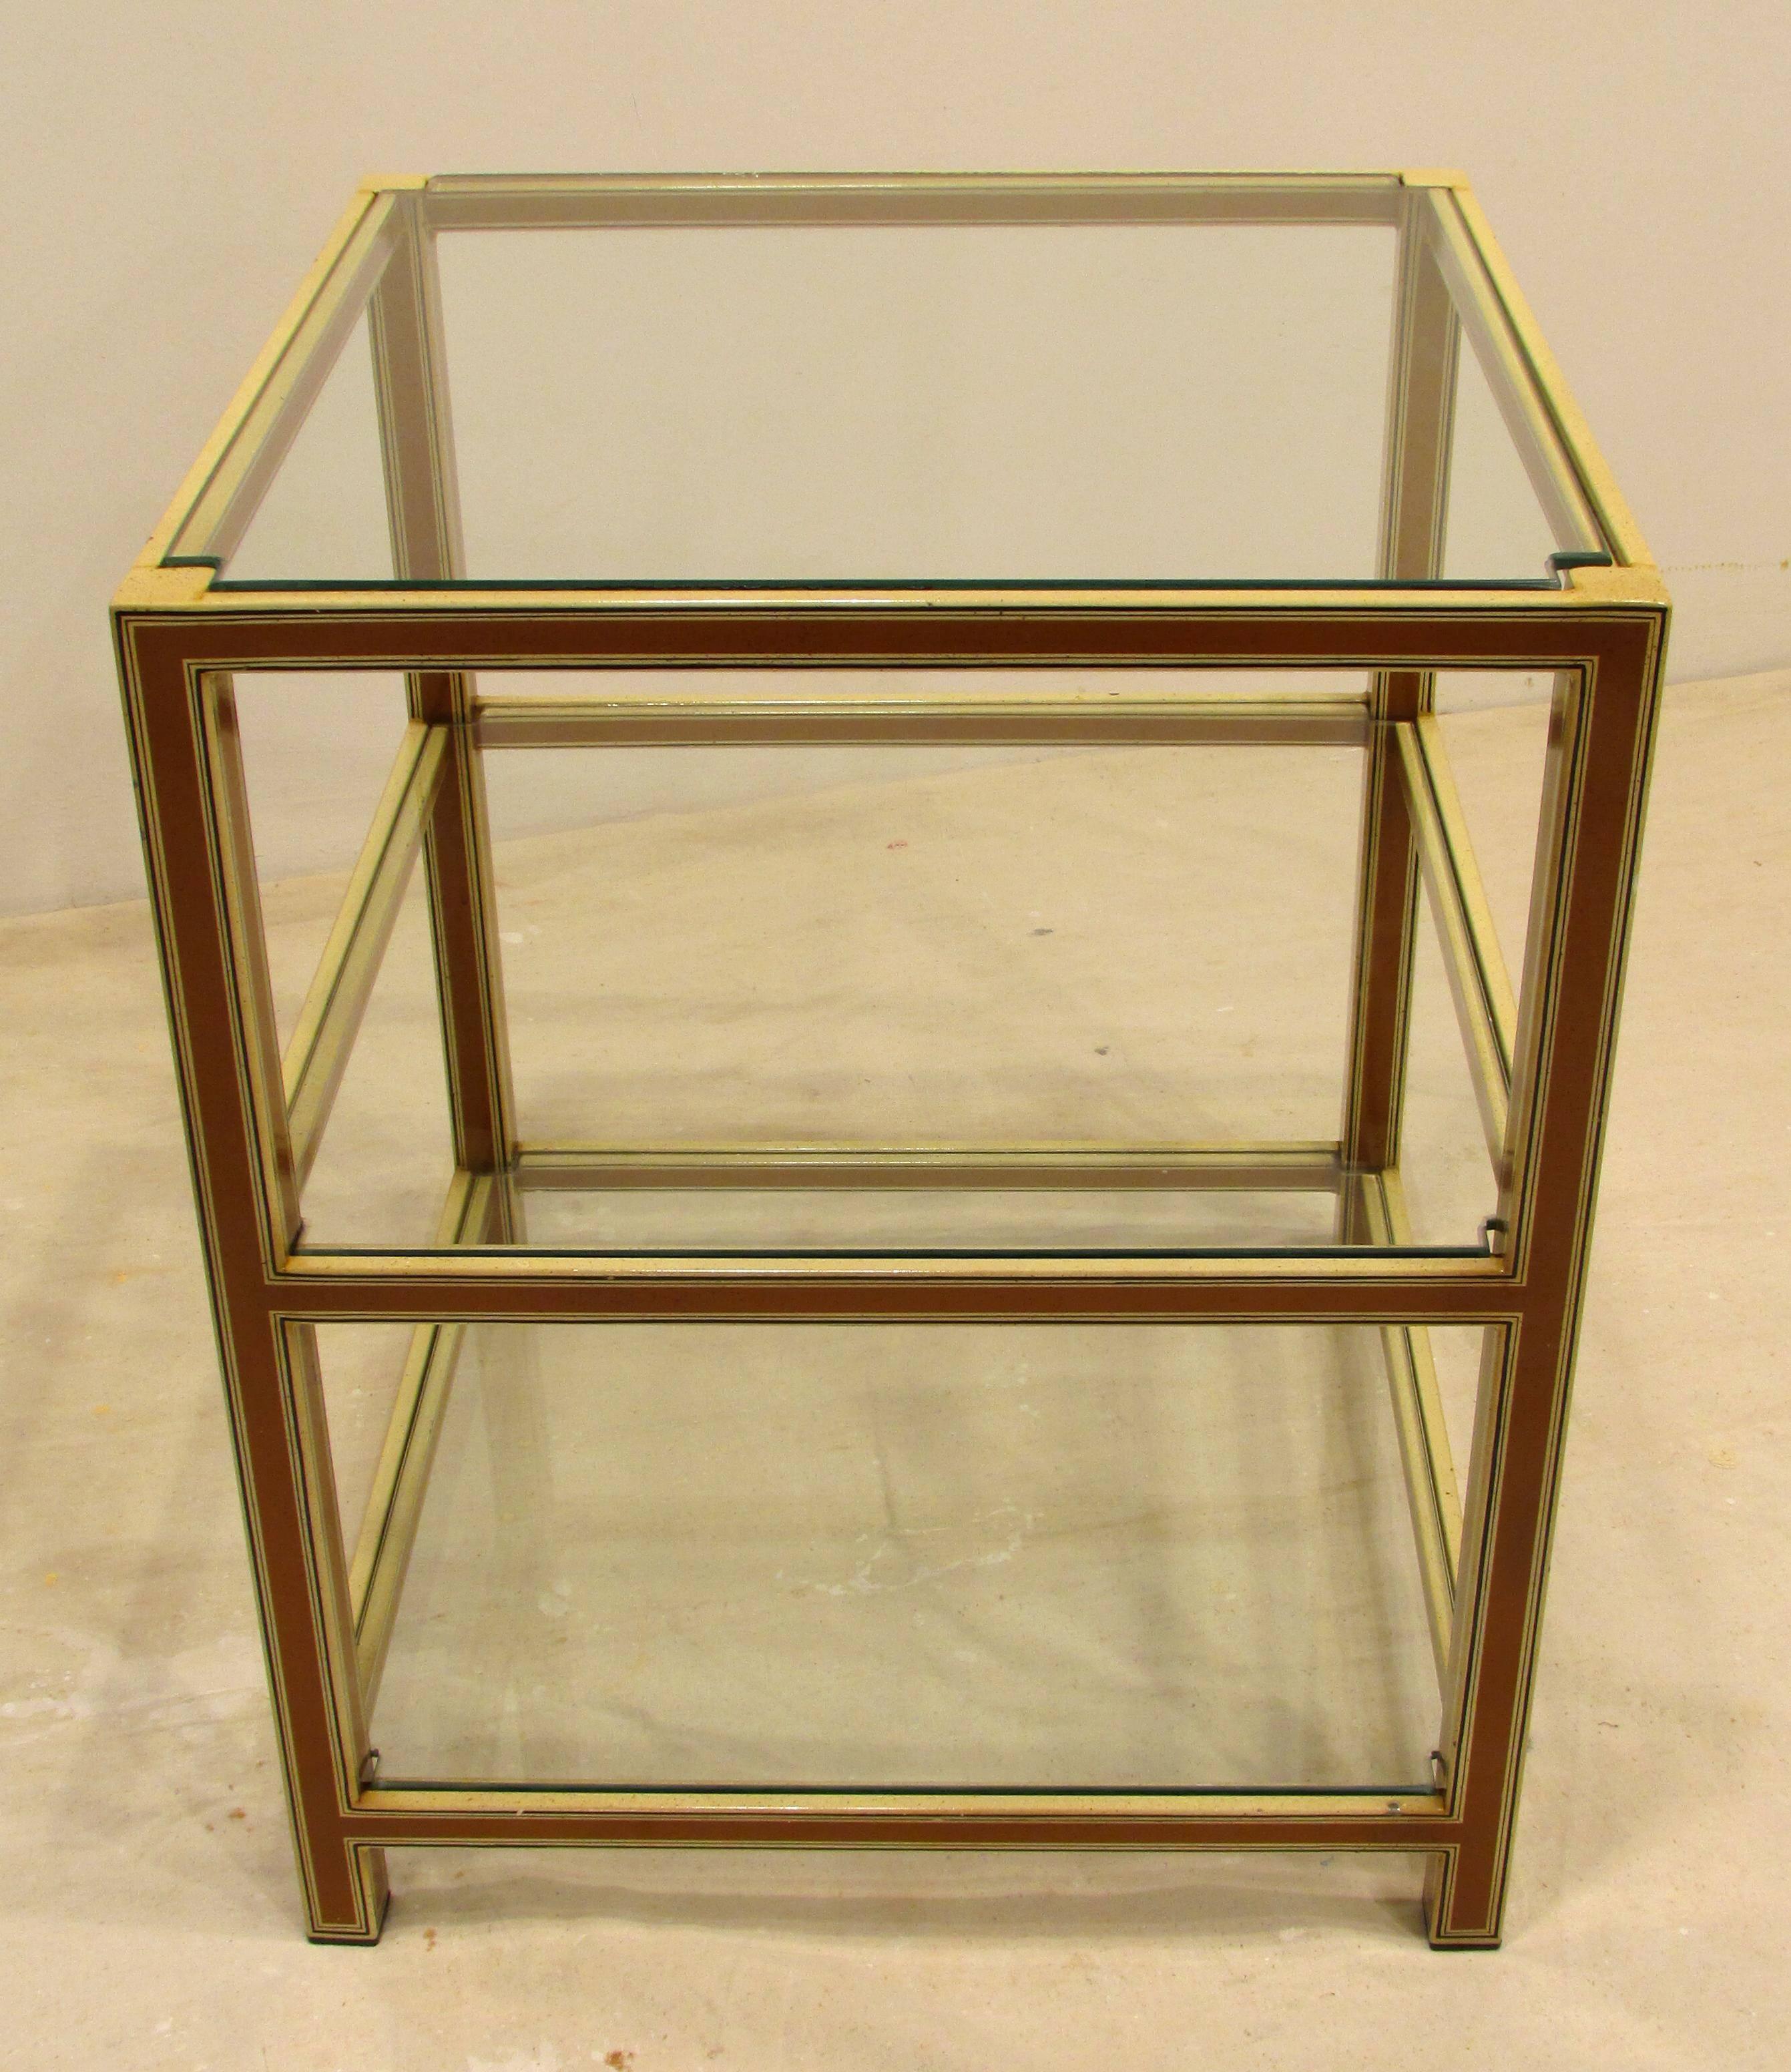 Small side table with hard baked vitreous enamel finish to metal with three inset glass shelves.